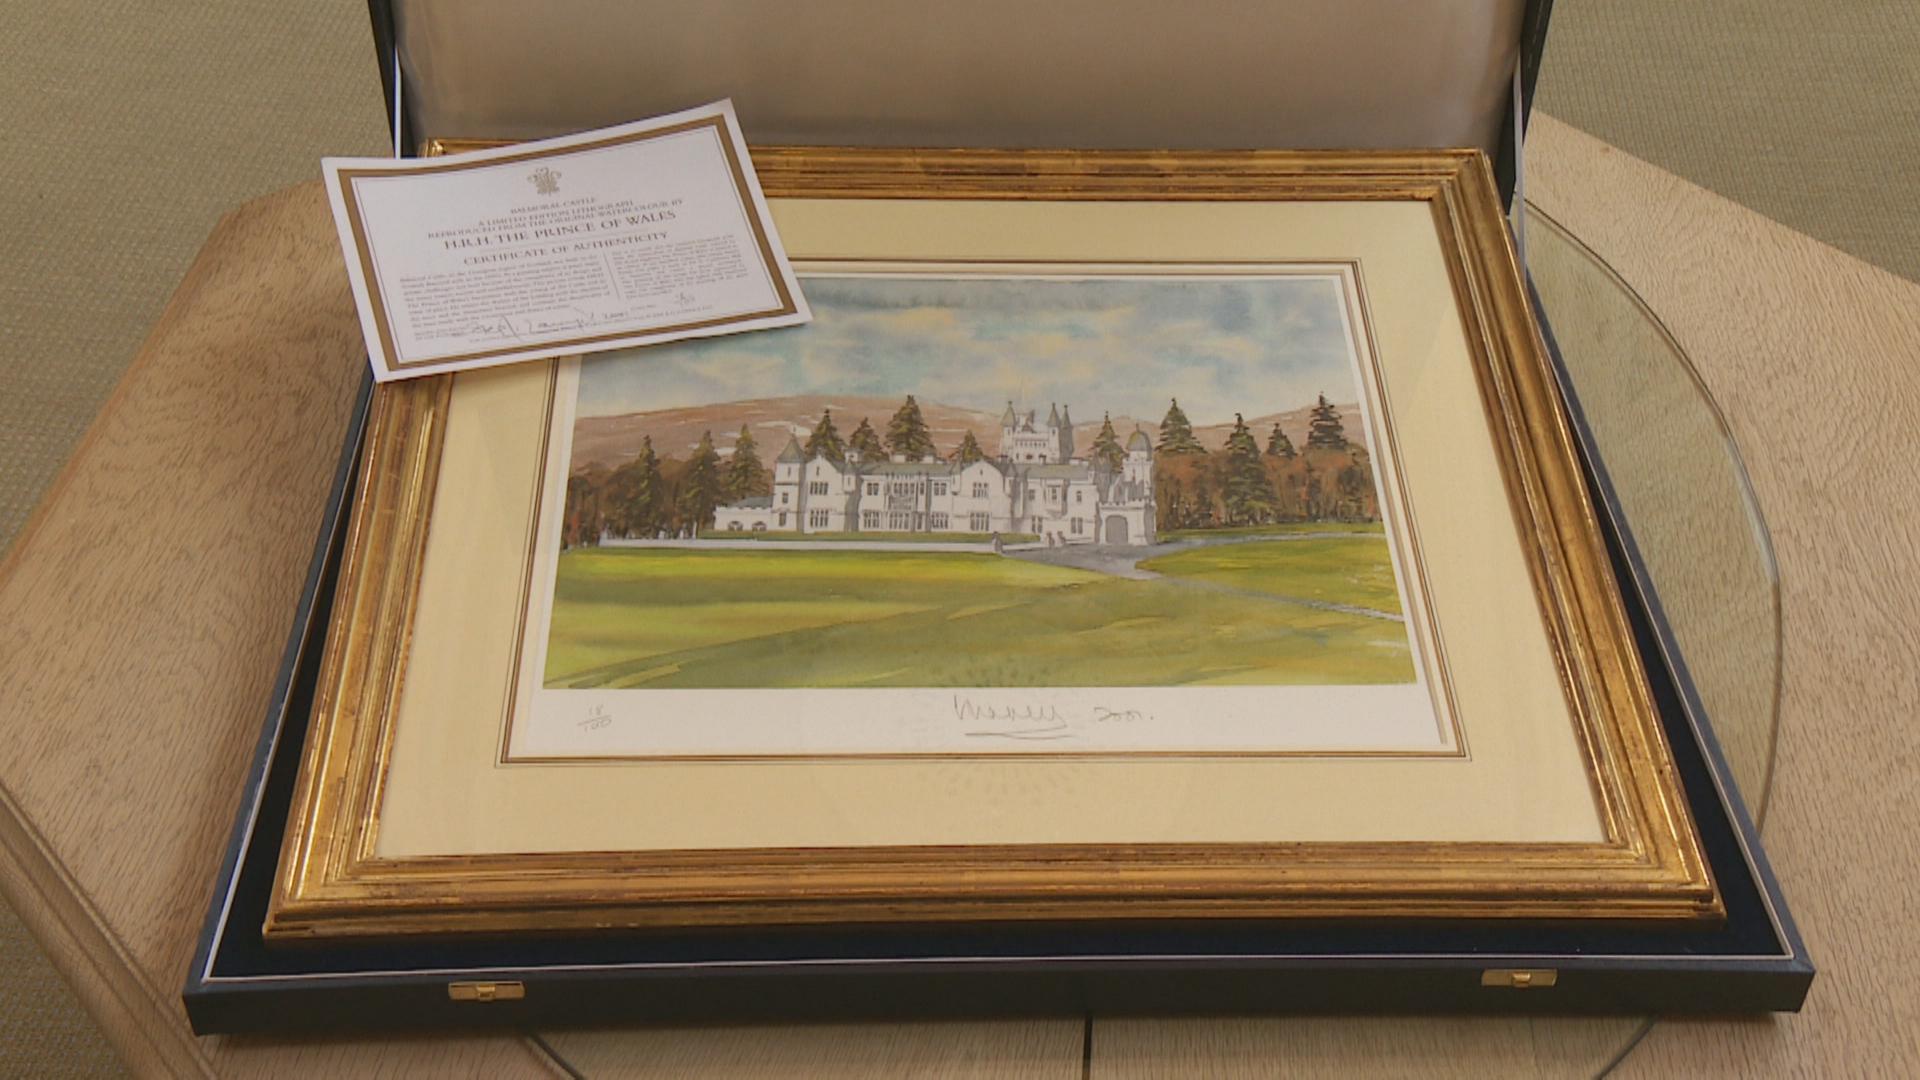 The painting comes with a certificate of authenticity.